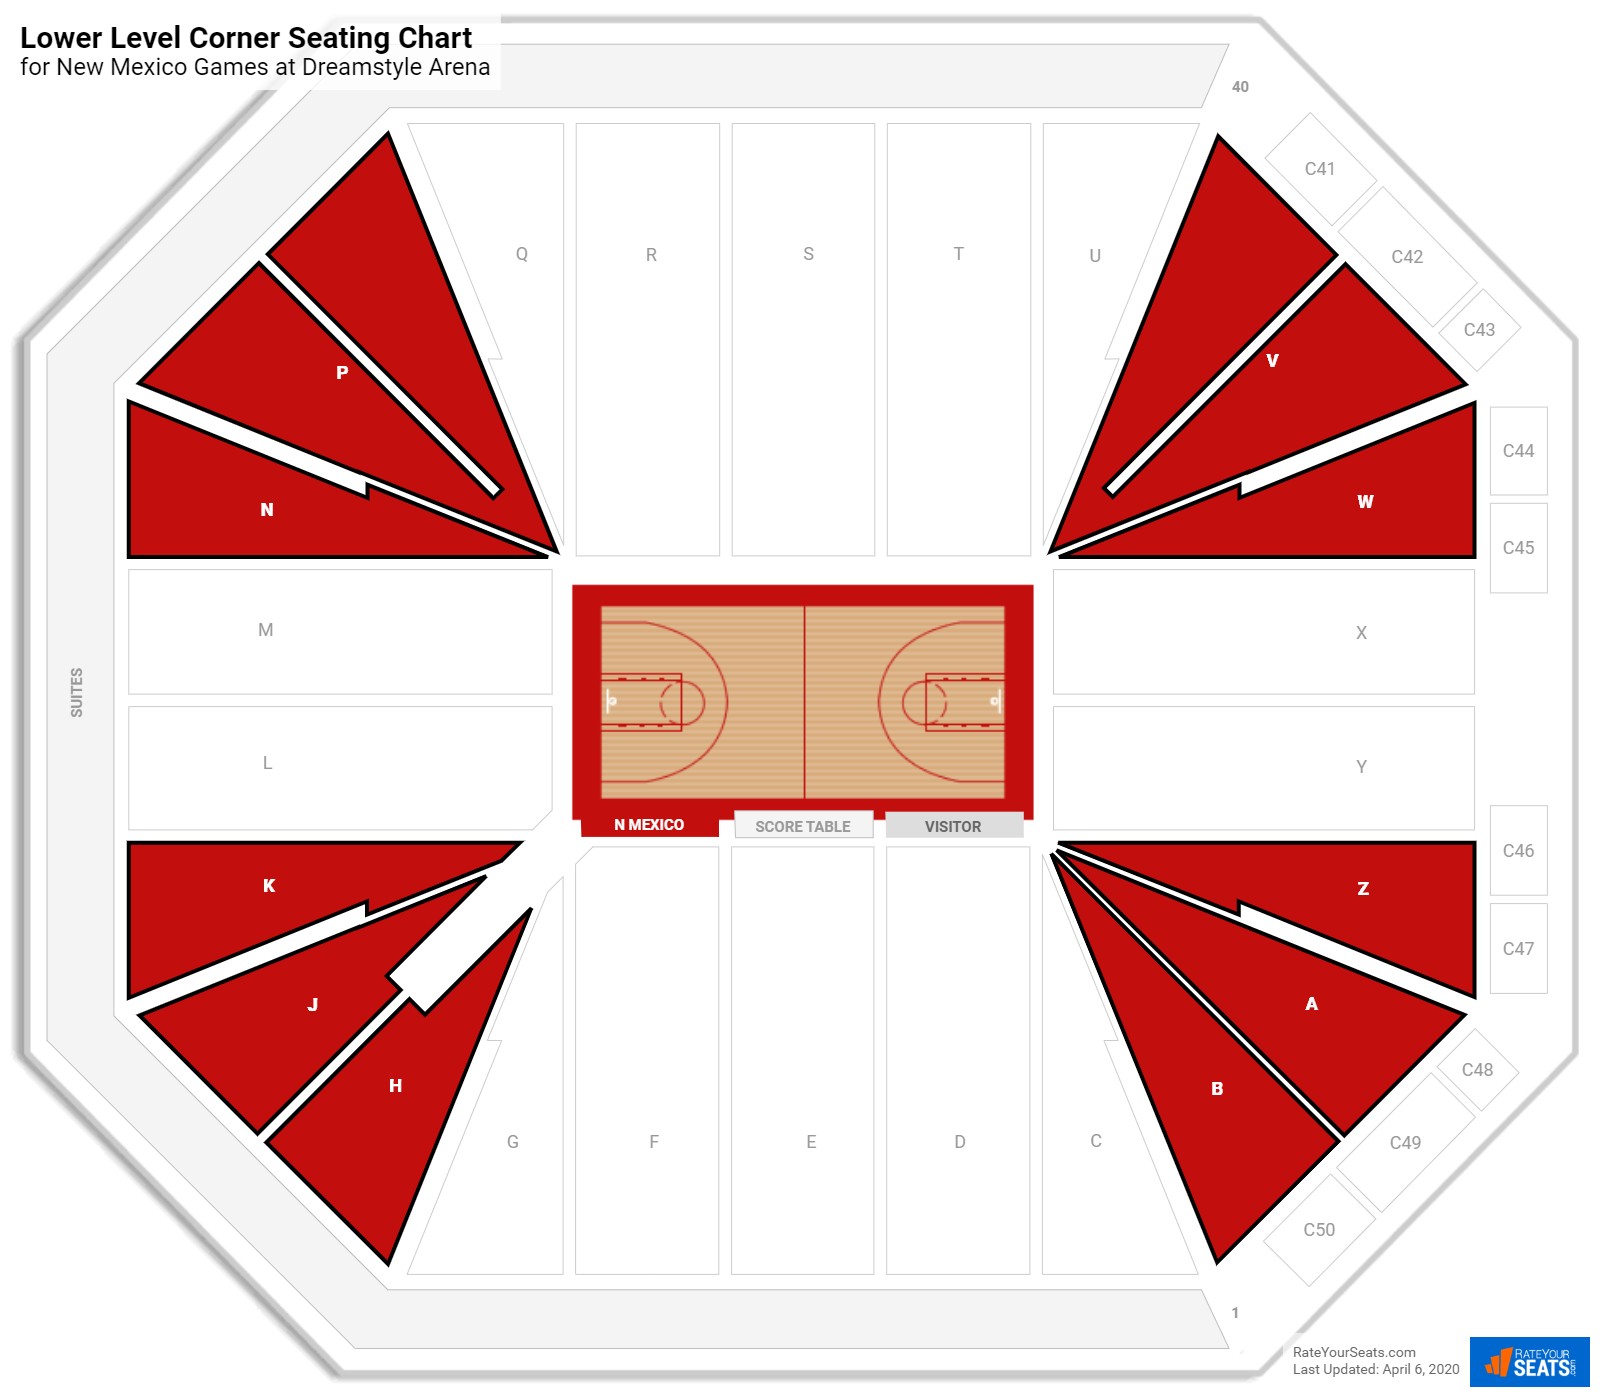 The Pit Seating Chart Rows